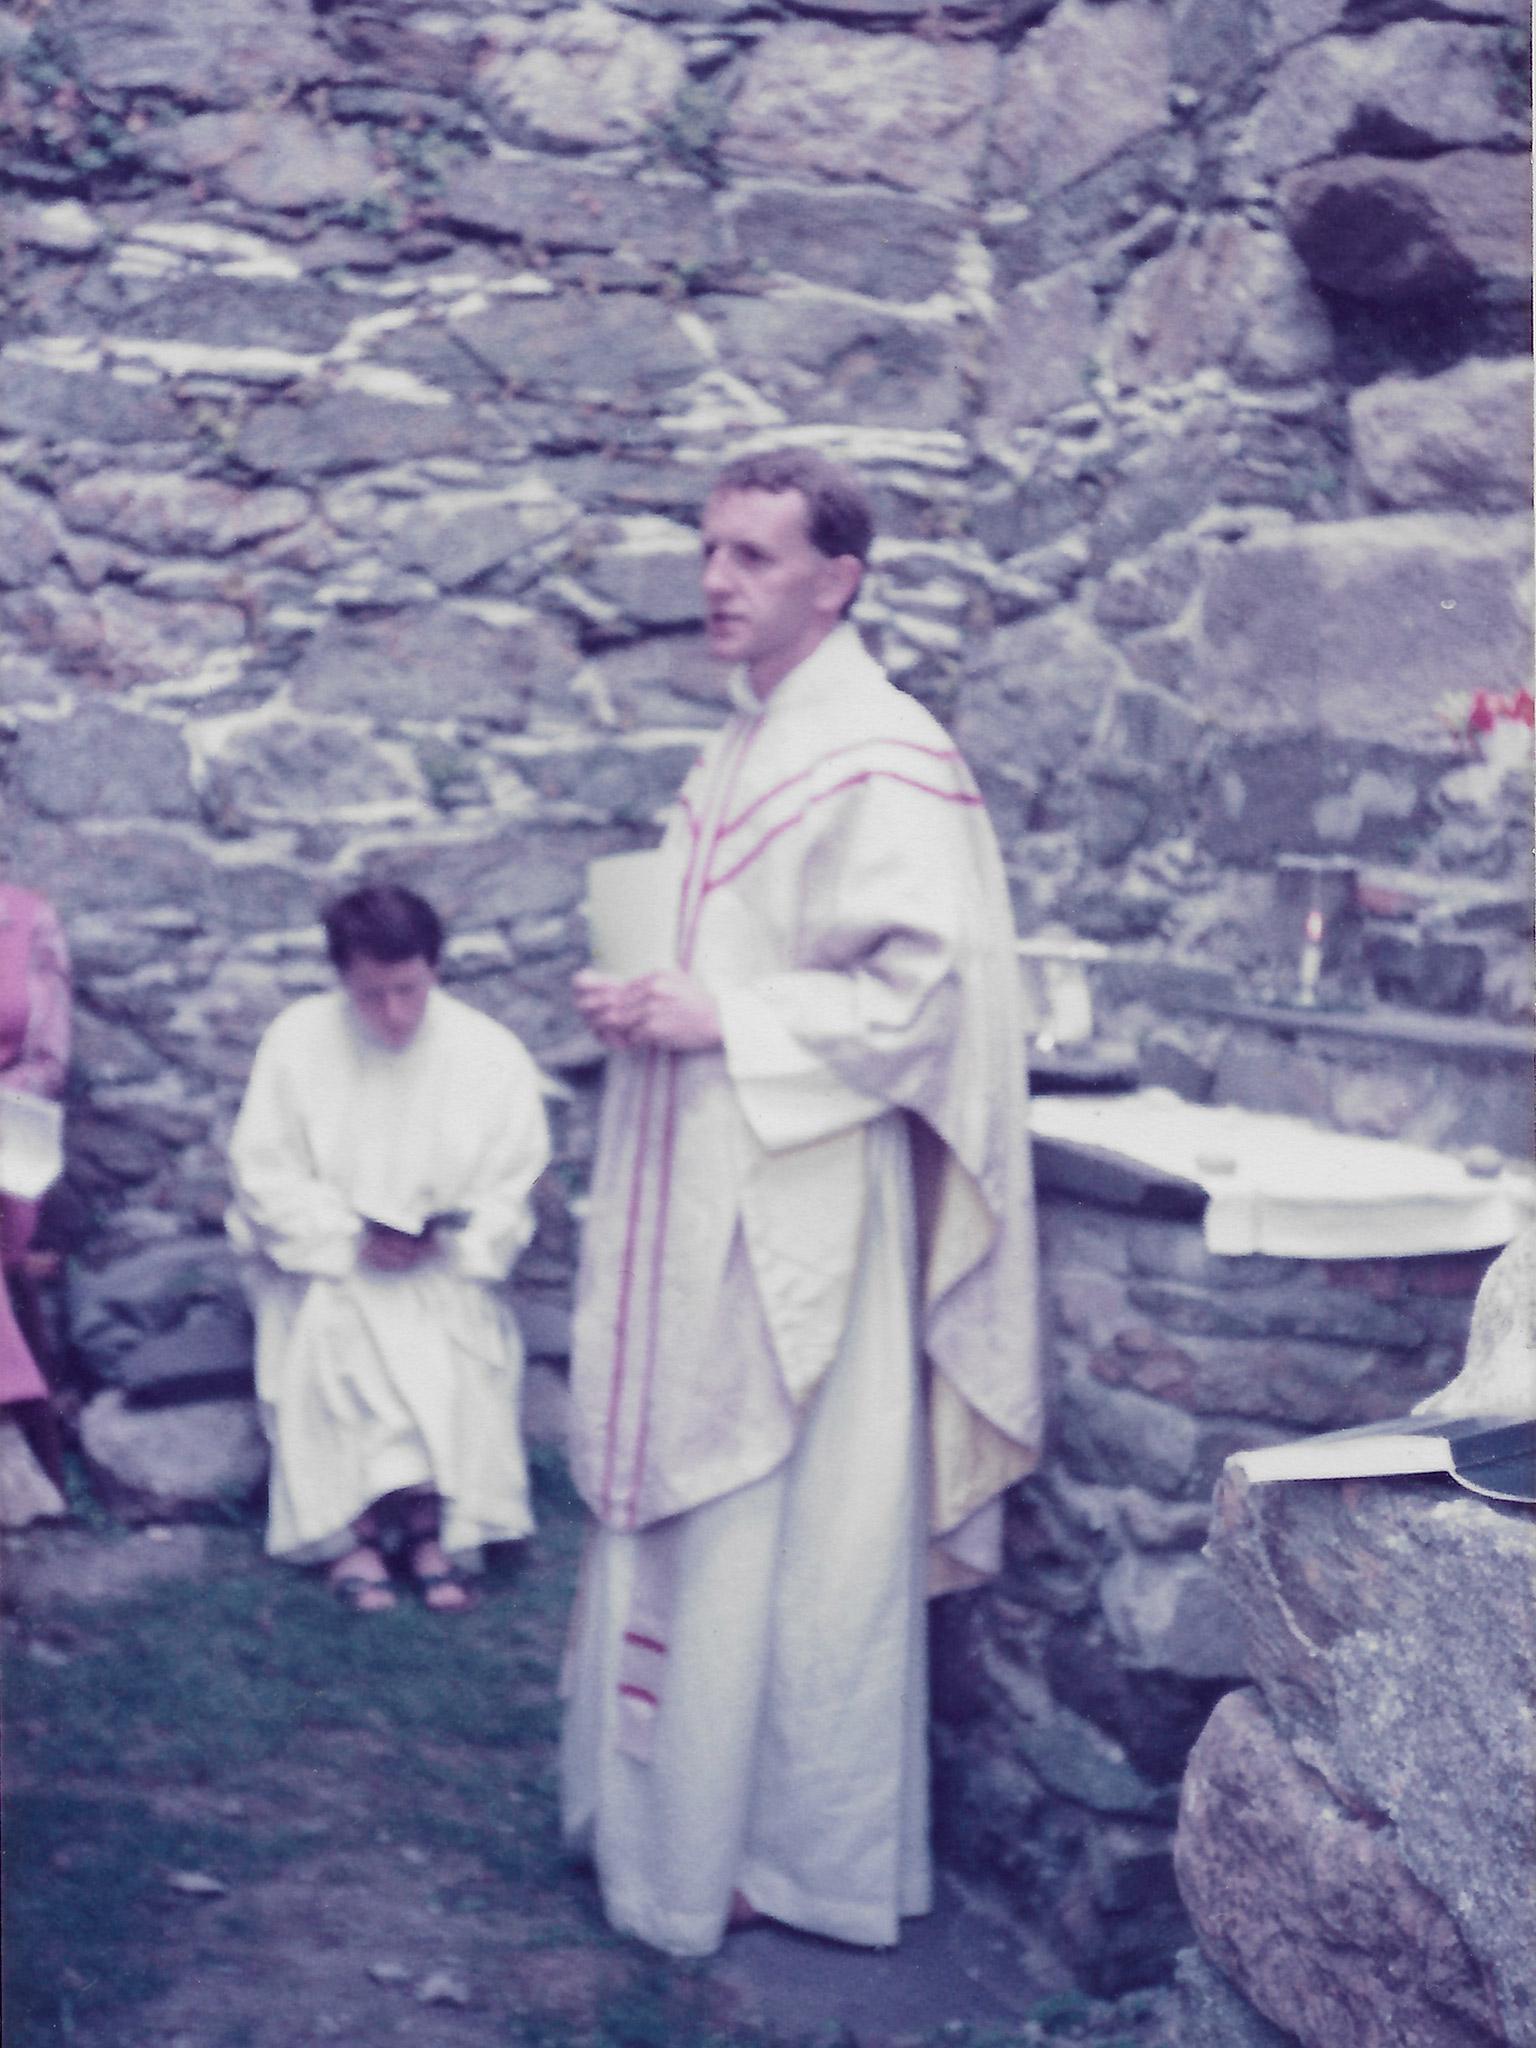 Simon leading mass in the ruined abbey of Barsey, 1984